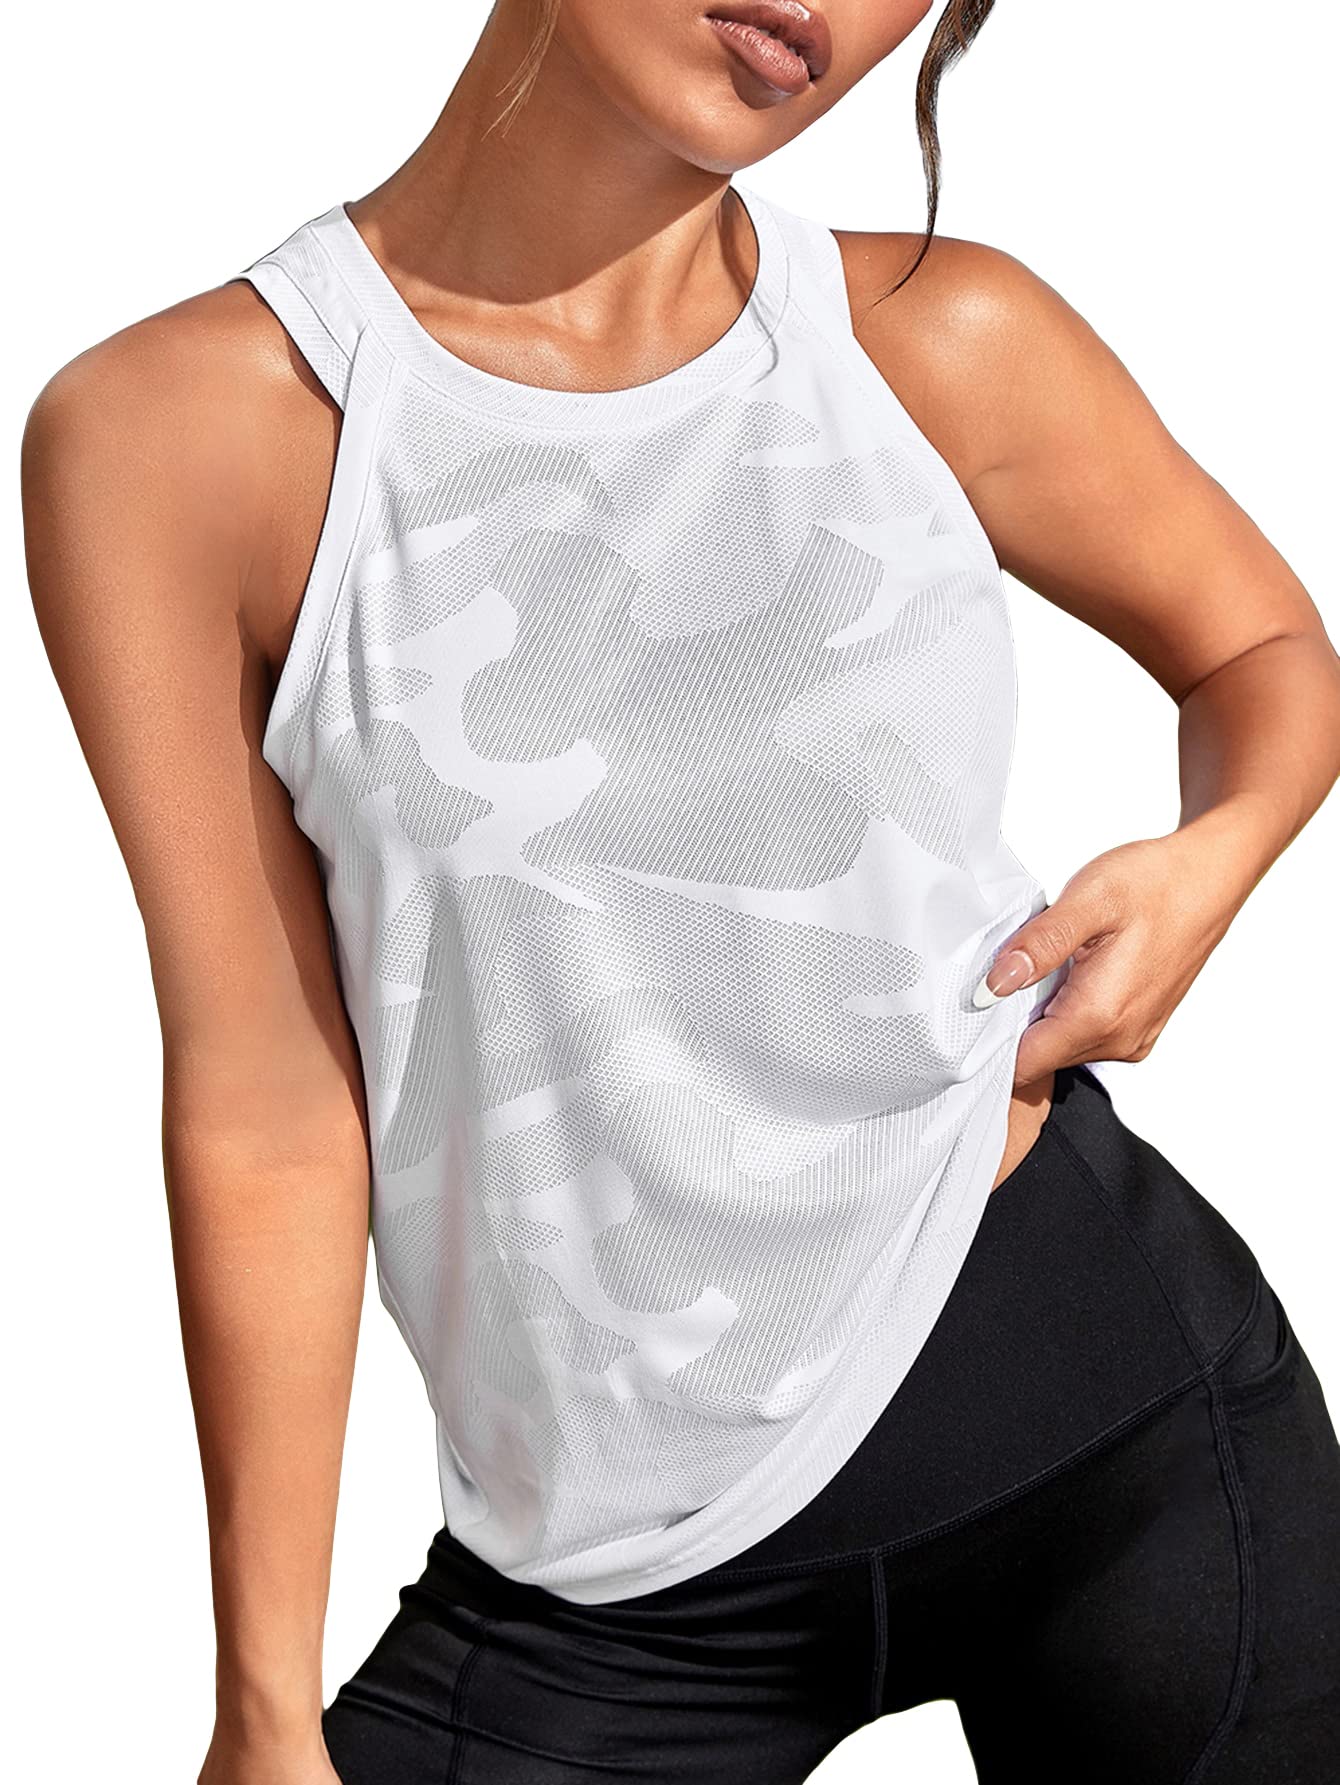 OYOANGLE Women's Camo Print Sleeveless Workout Shirts Exercise Running Tank  Tops Active Gym Tops Medium White